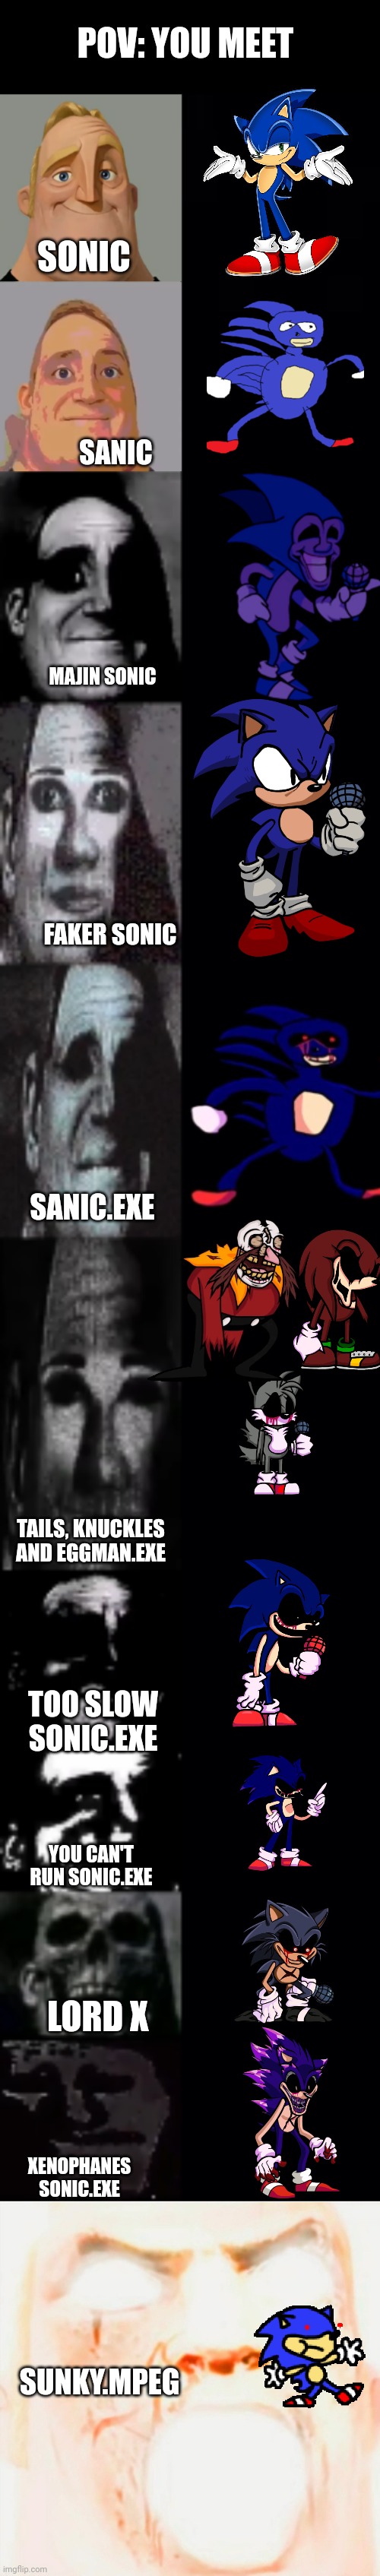 ALL OF THE SONICS | POV: YOU MEET; SONIC; SANIC; MAJIN SONIC; FAKER SONIC; SANIC.EXE; TAILS, KNUCKLES AND EGGMAN.EXE; TOO SLOW SONIC.EXE; YOU CAN'T RUN SONIC.EXE; LORD X; XENOPHANES SONIC.EXE; SUNKY.MPEG | image tagged in mr incredible becoming uncanny,mr incredible meme god tier,sonic,sonic the hedgehog,sonic exe | made w/ Imgflip meme maker